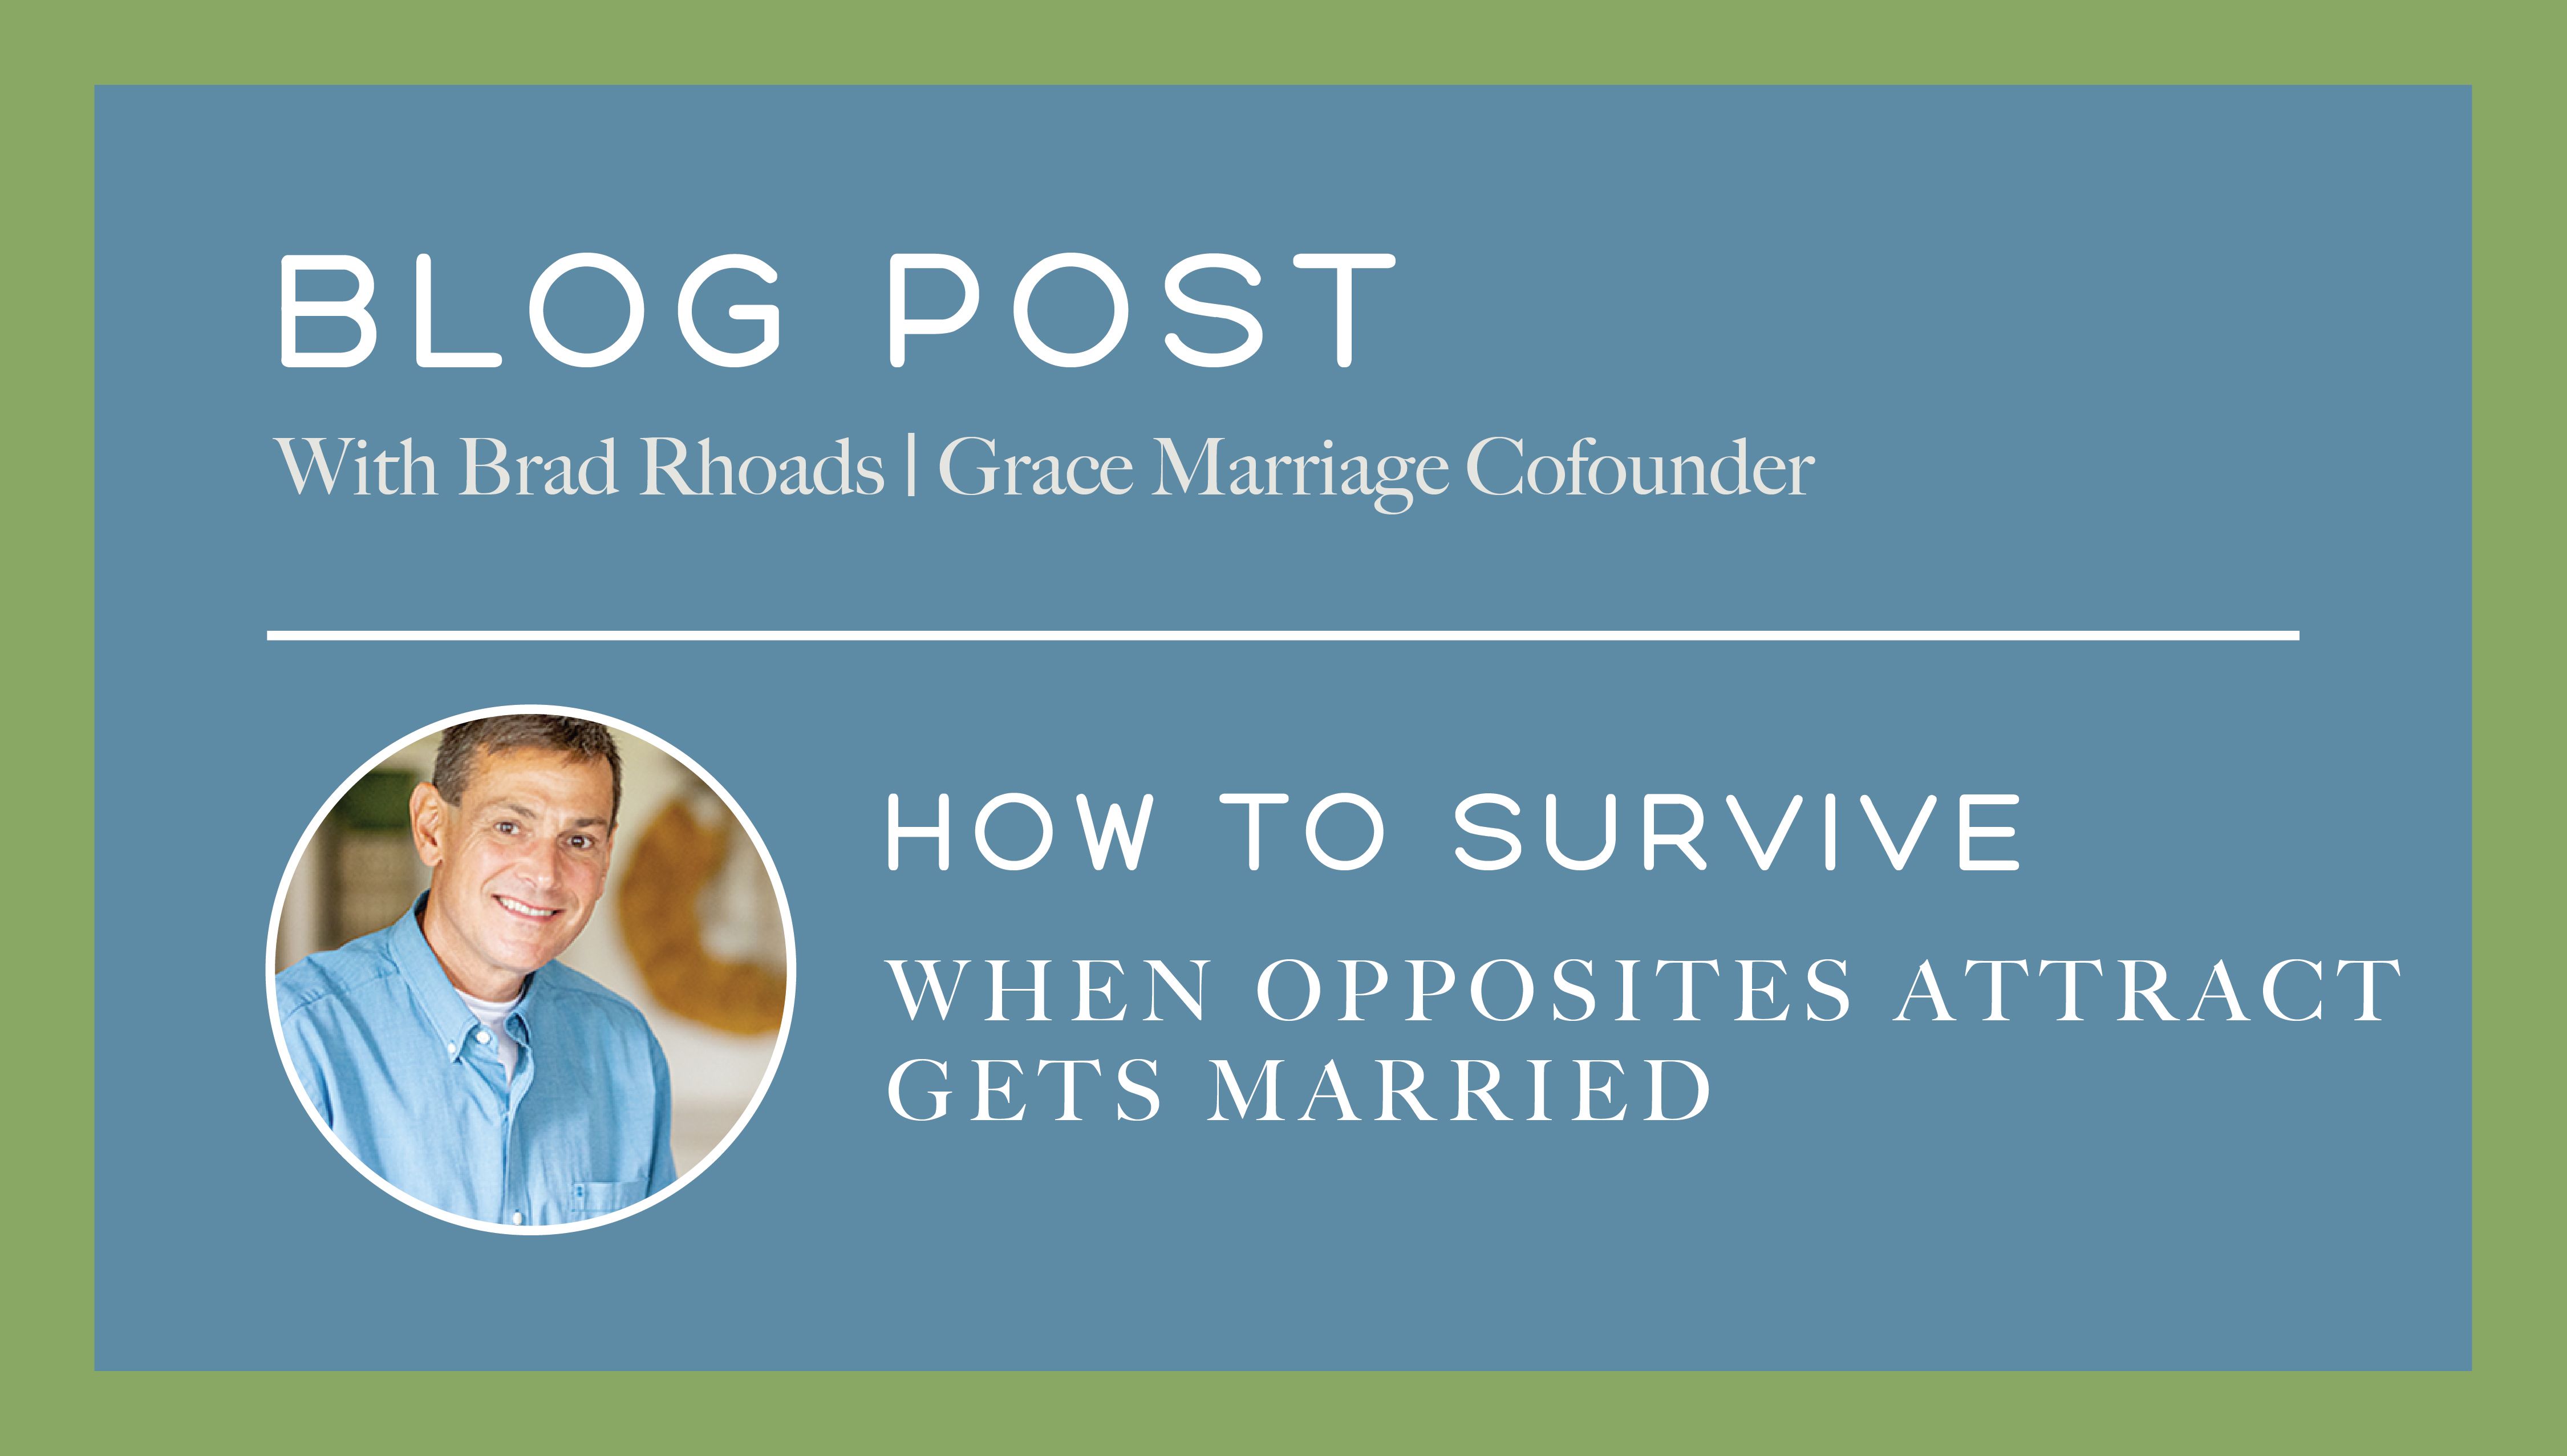 How to Survive When Opposites Attract Gets Married